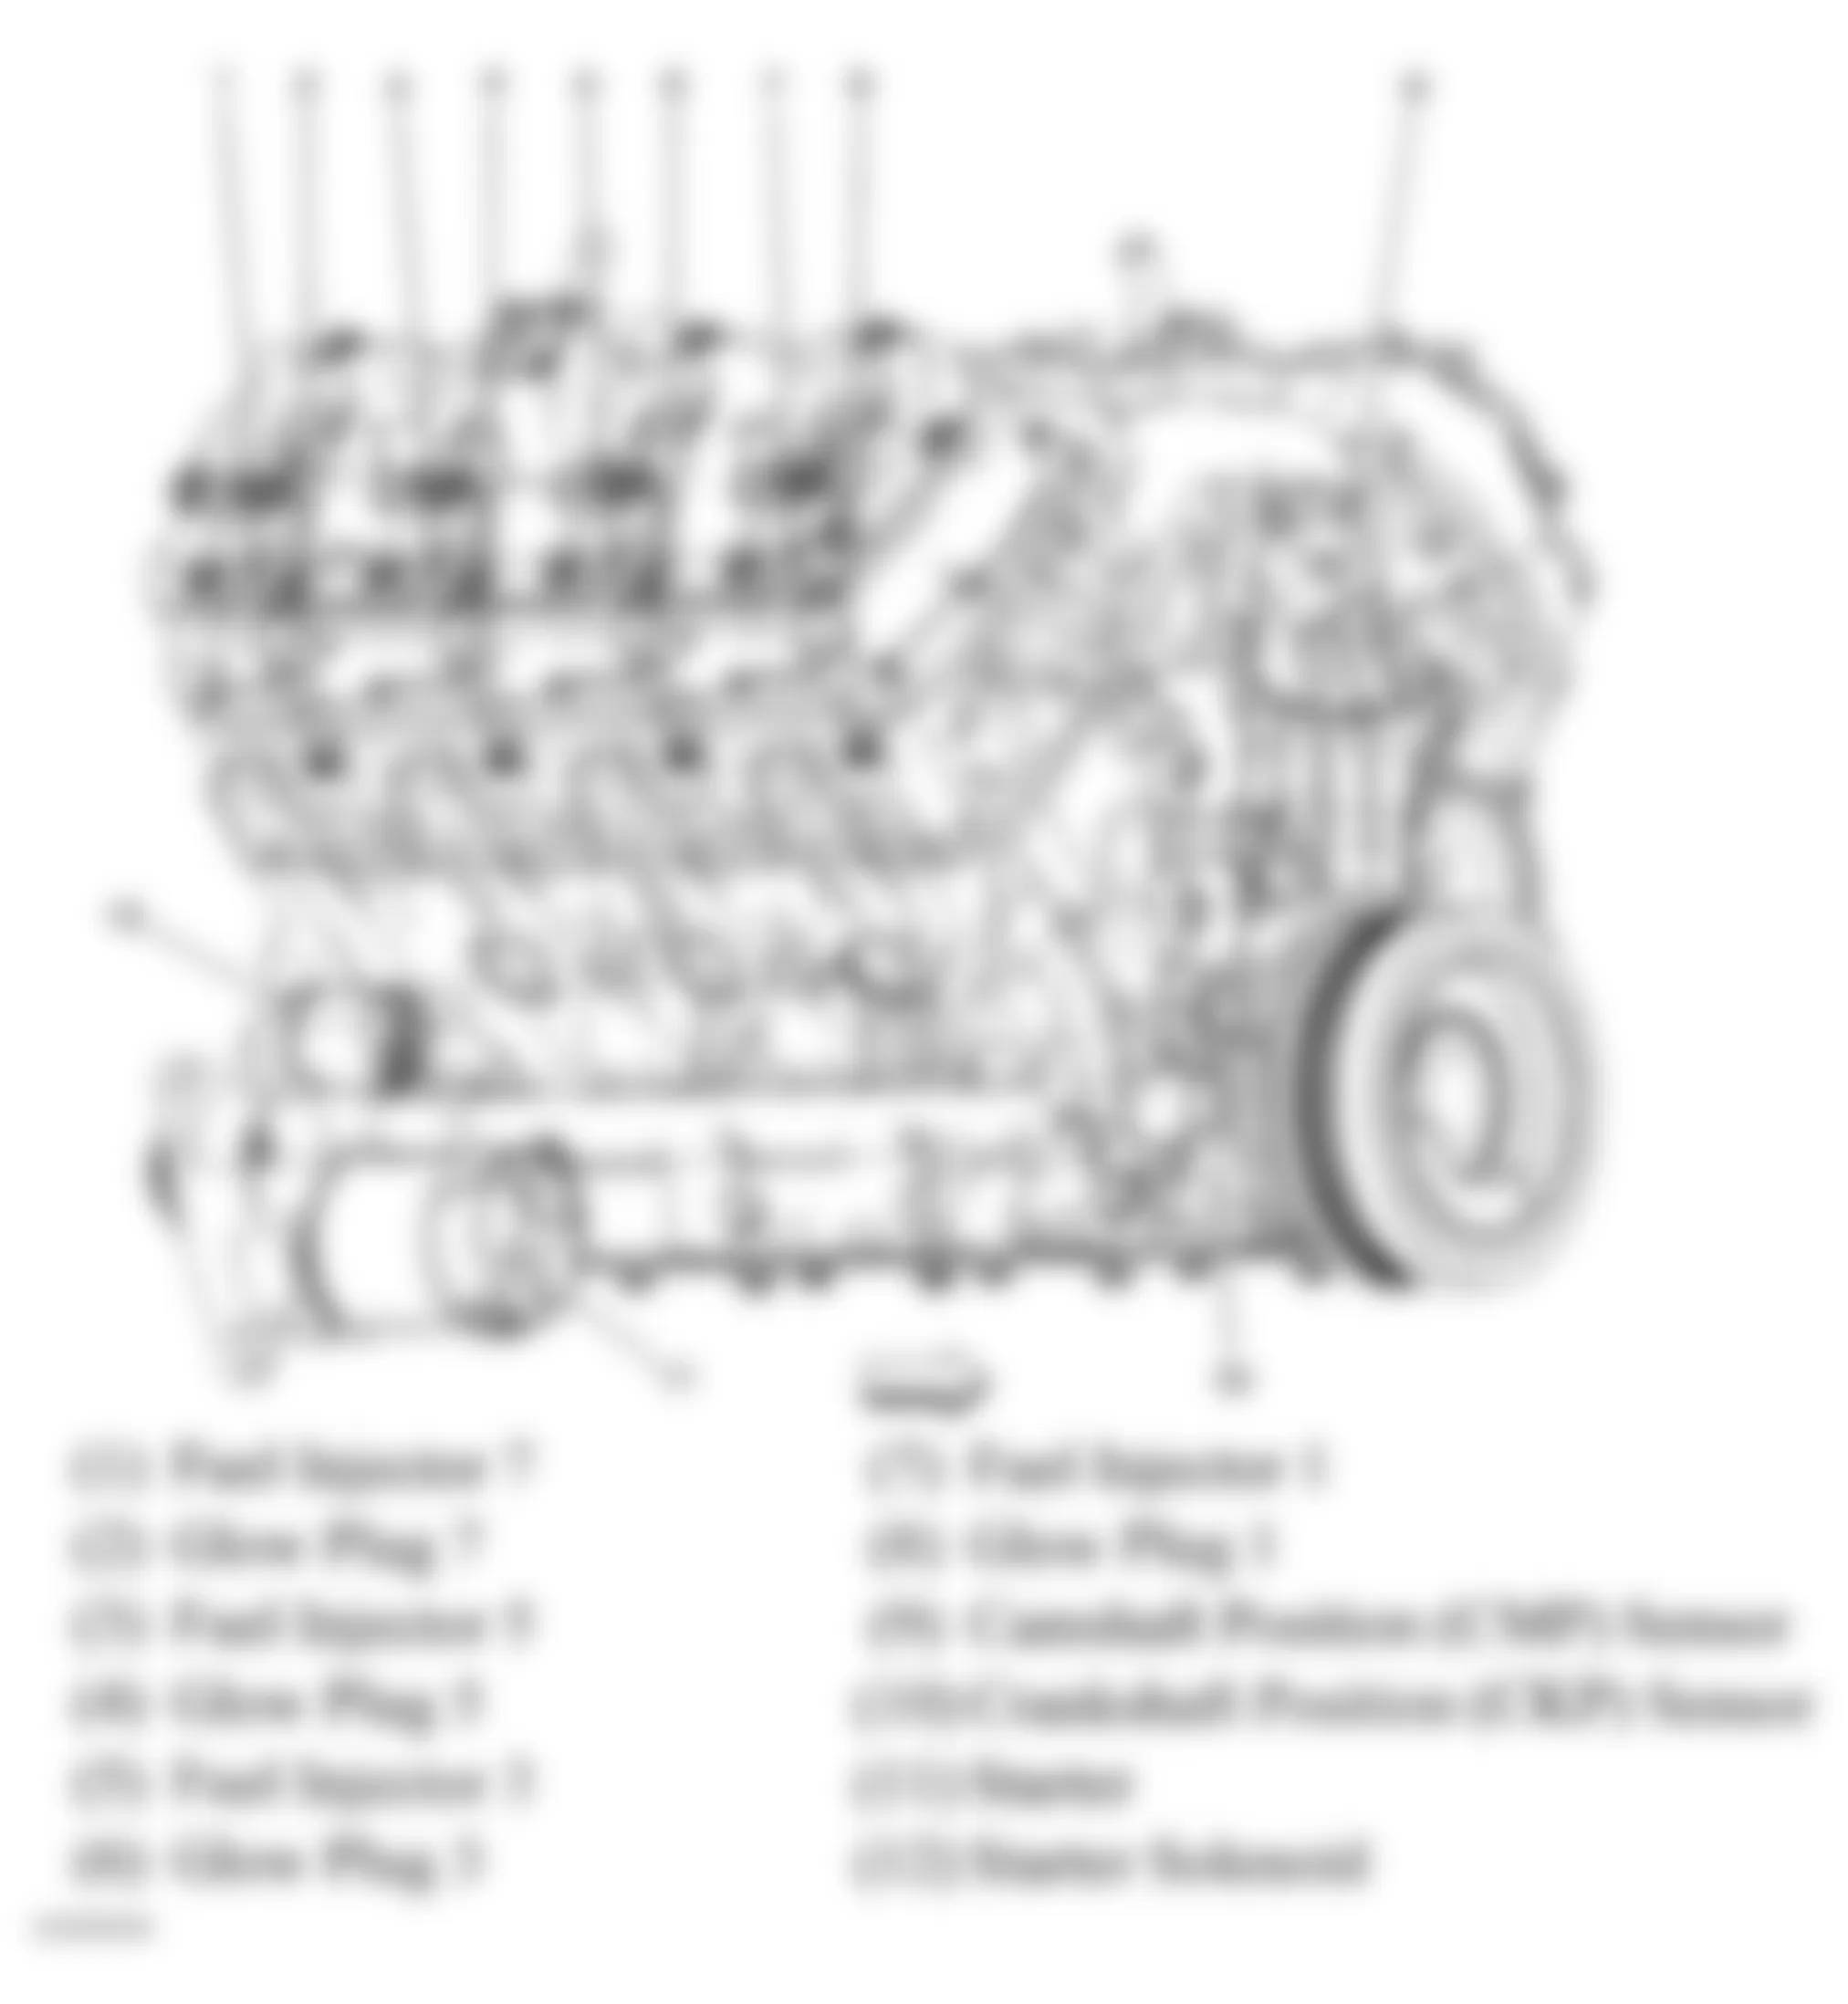 GMC Savana G3500 2006 - Component Locations -  Right Side Of Engine (6.6L VIN W)